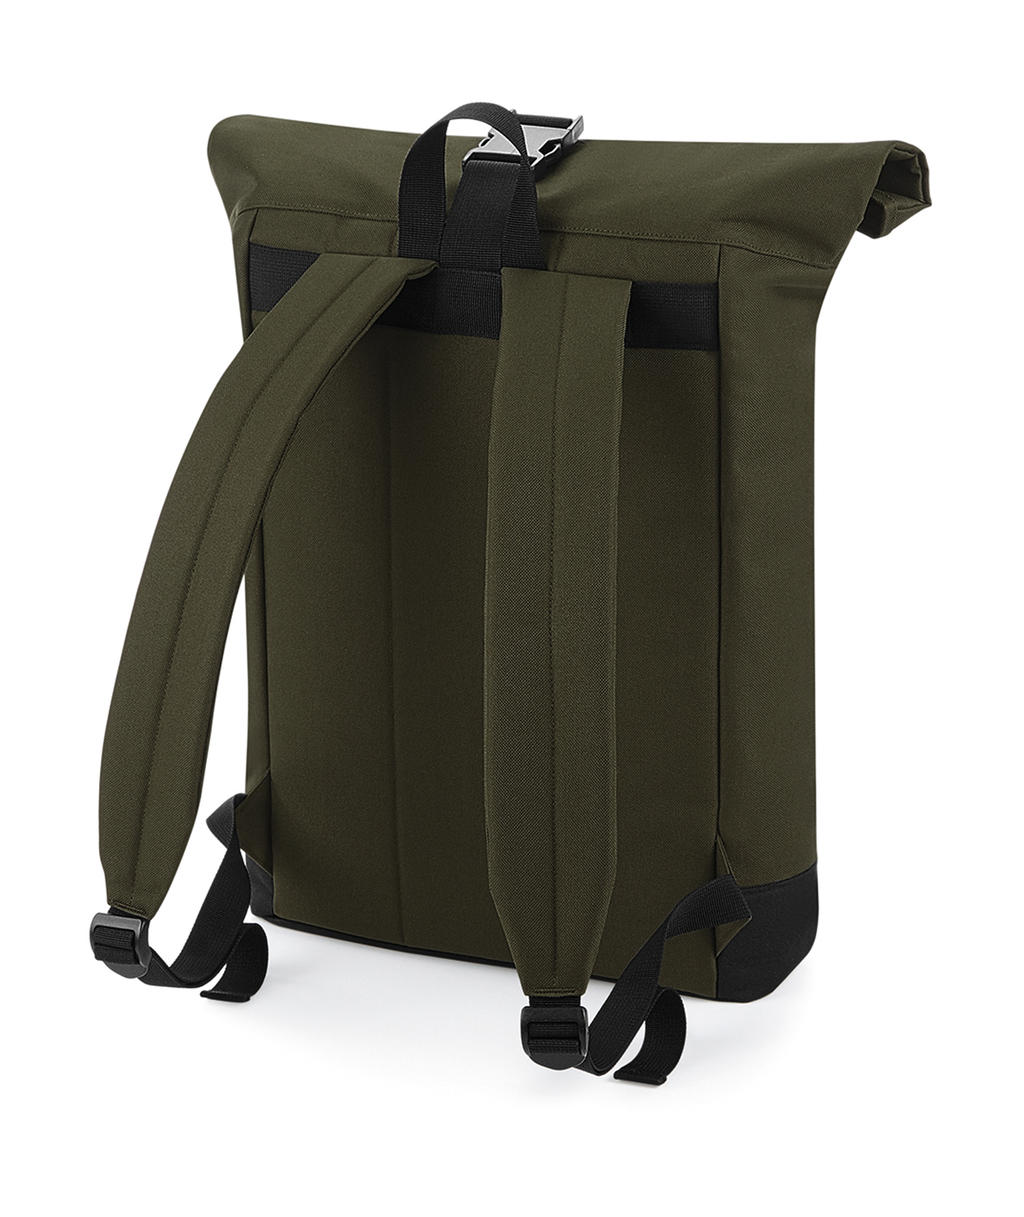  Roll-Top Backpack in Farbe Black